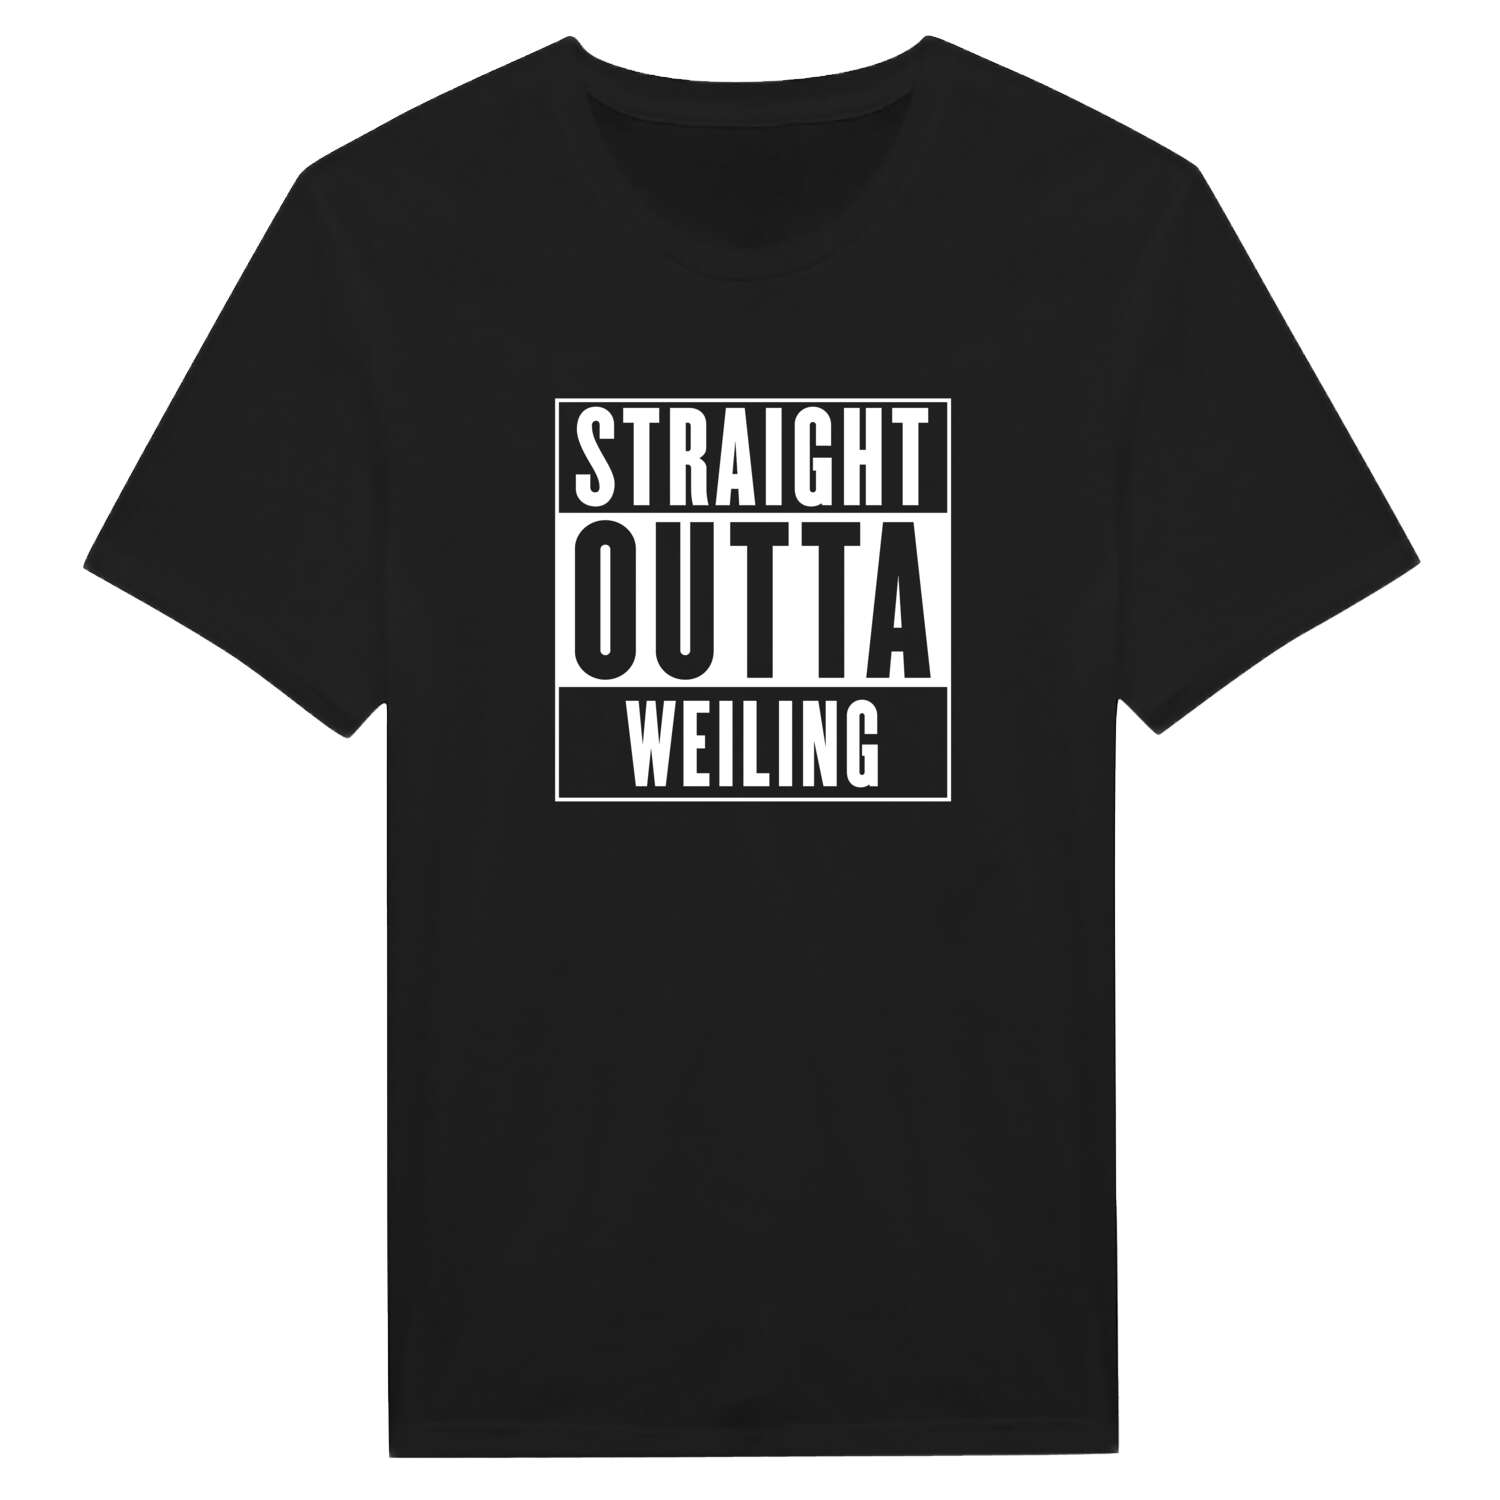 Weiling T-Shirt »Straight Outta«